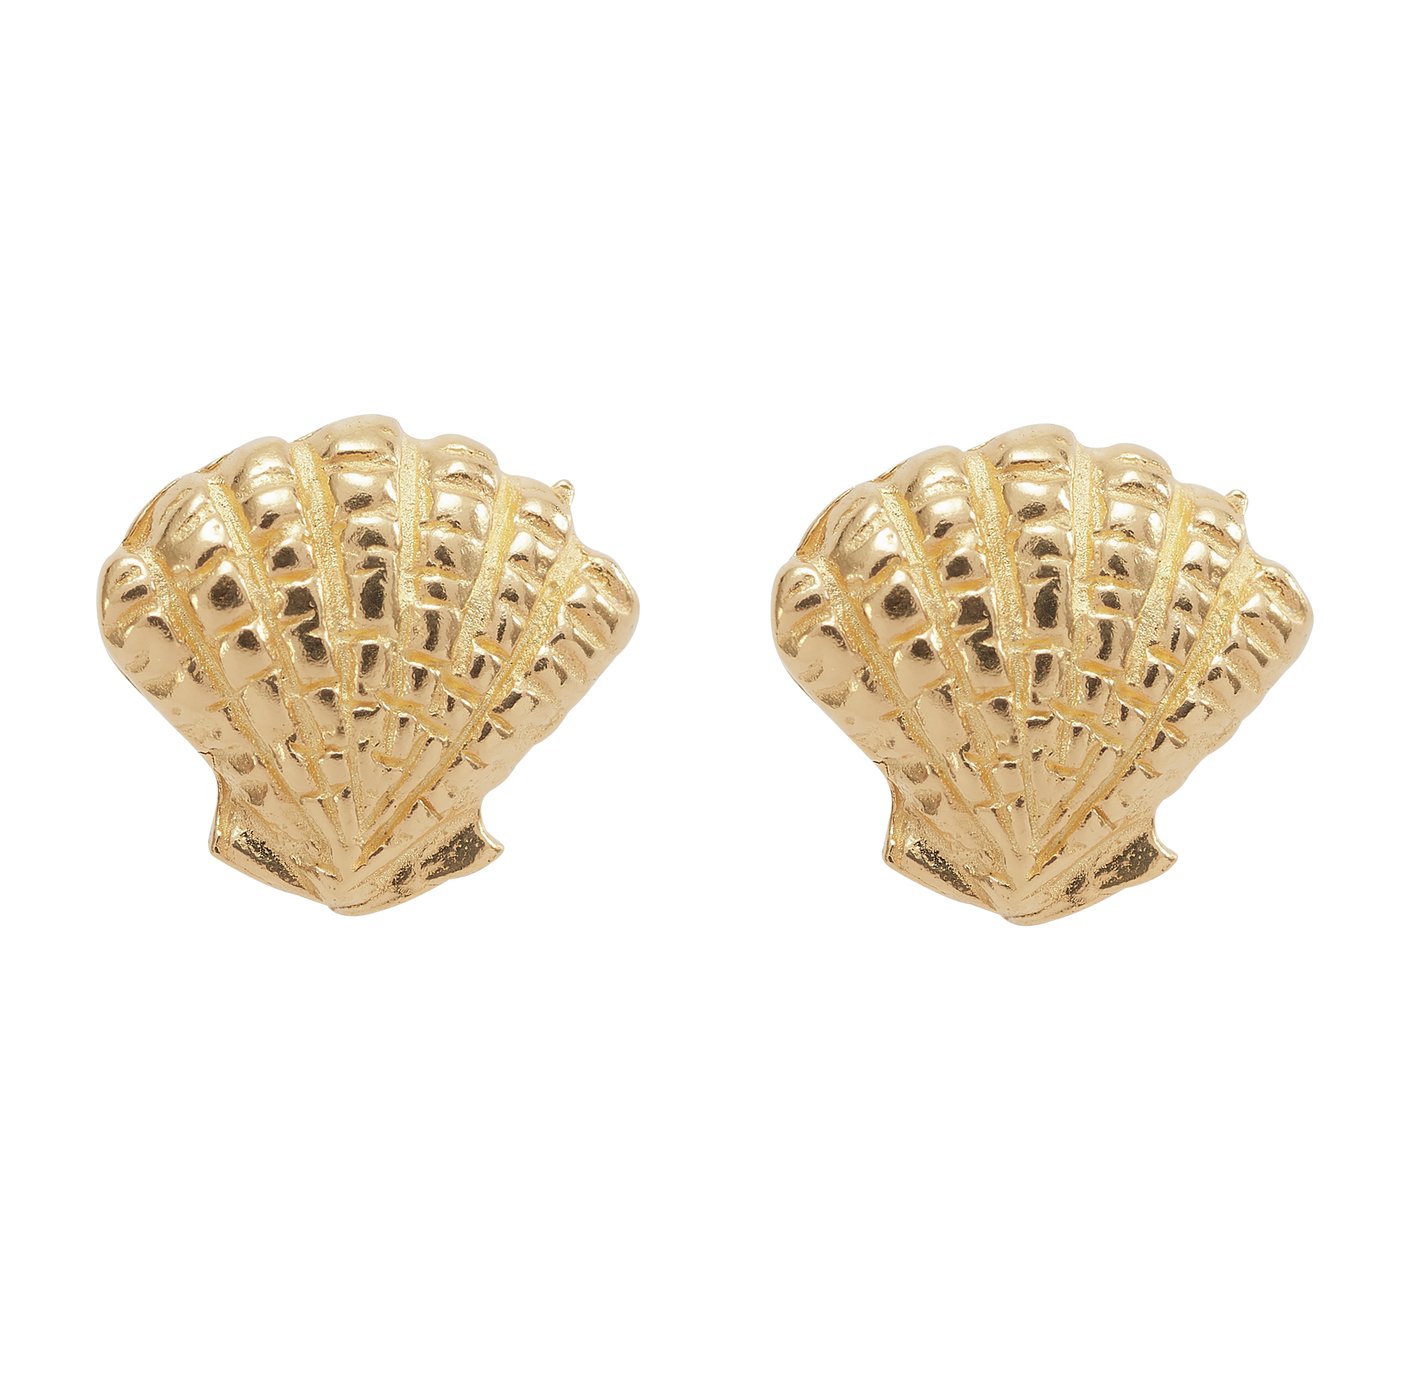 Revere 9ct Gold Plated Sterling Silver Shell Stud Earrings Review